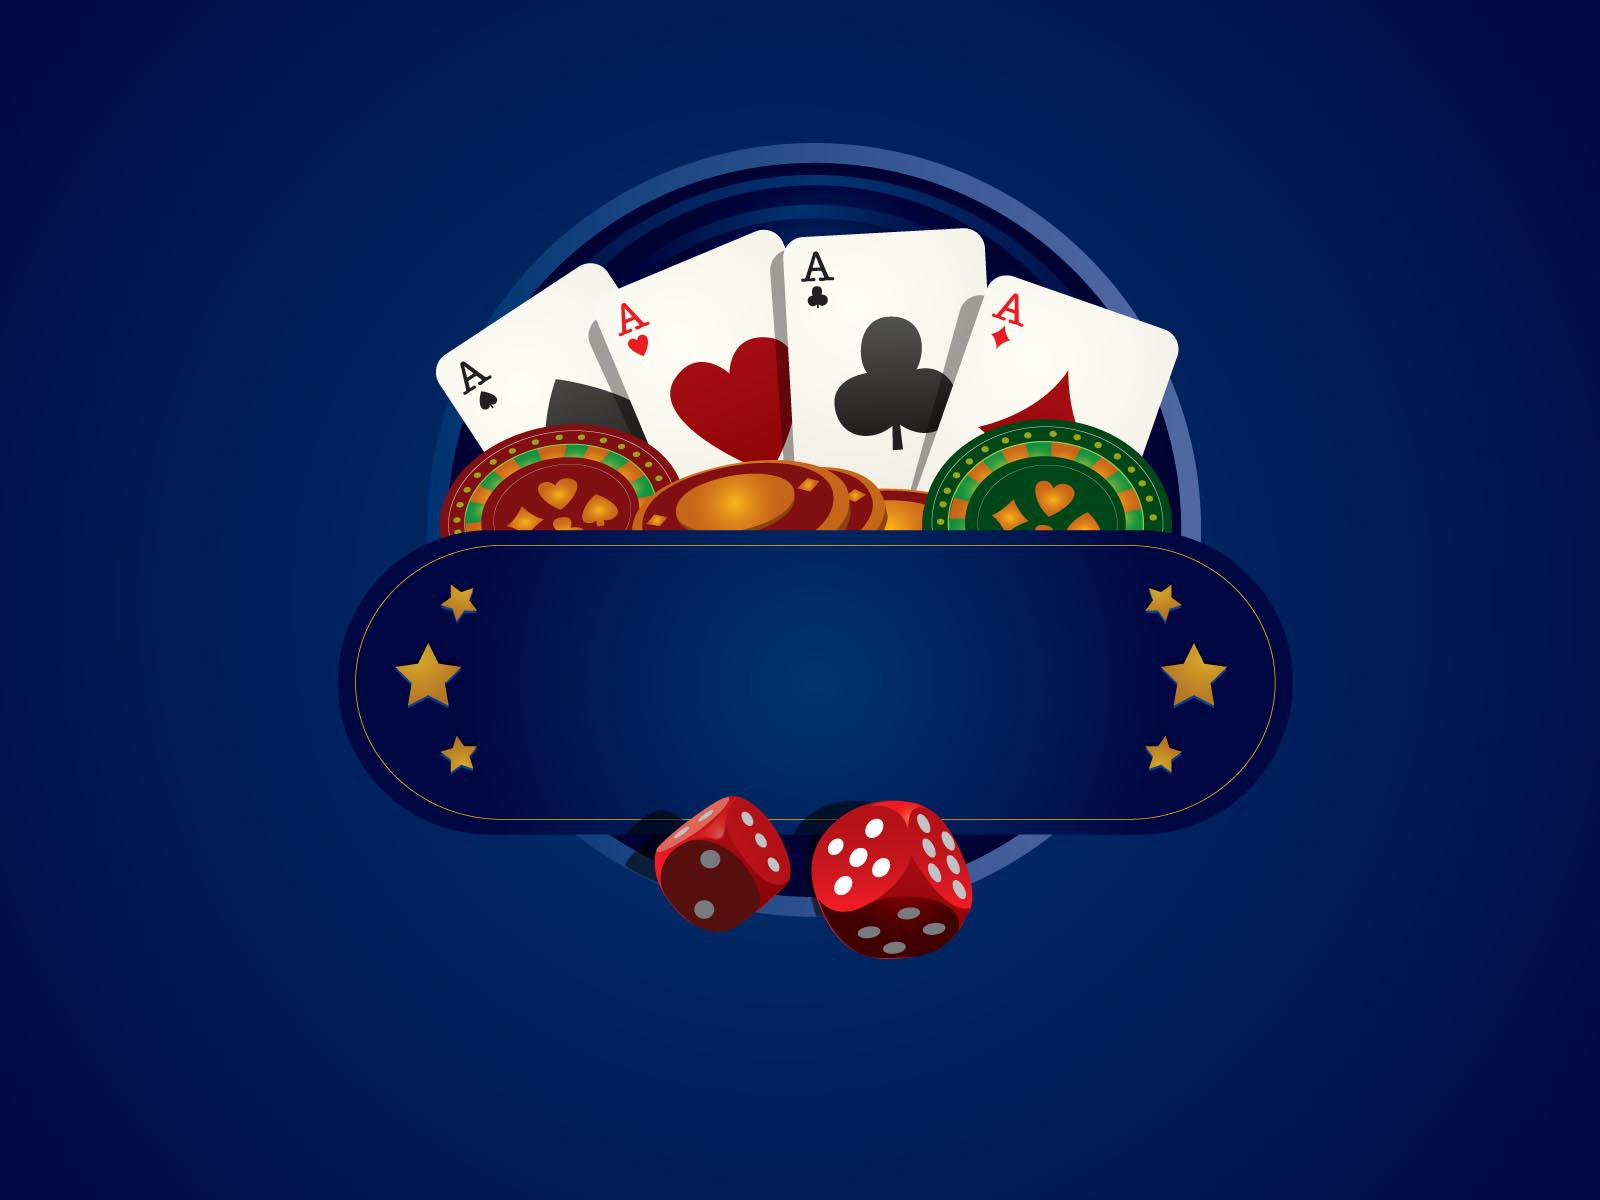 Where Strategy Reigns Supreme - Online Casino Websites for Skillful Players and Gamblers